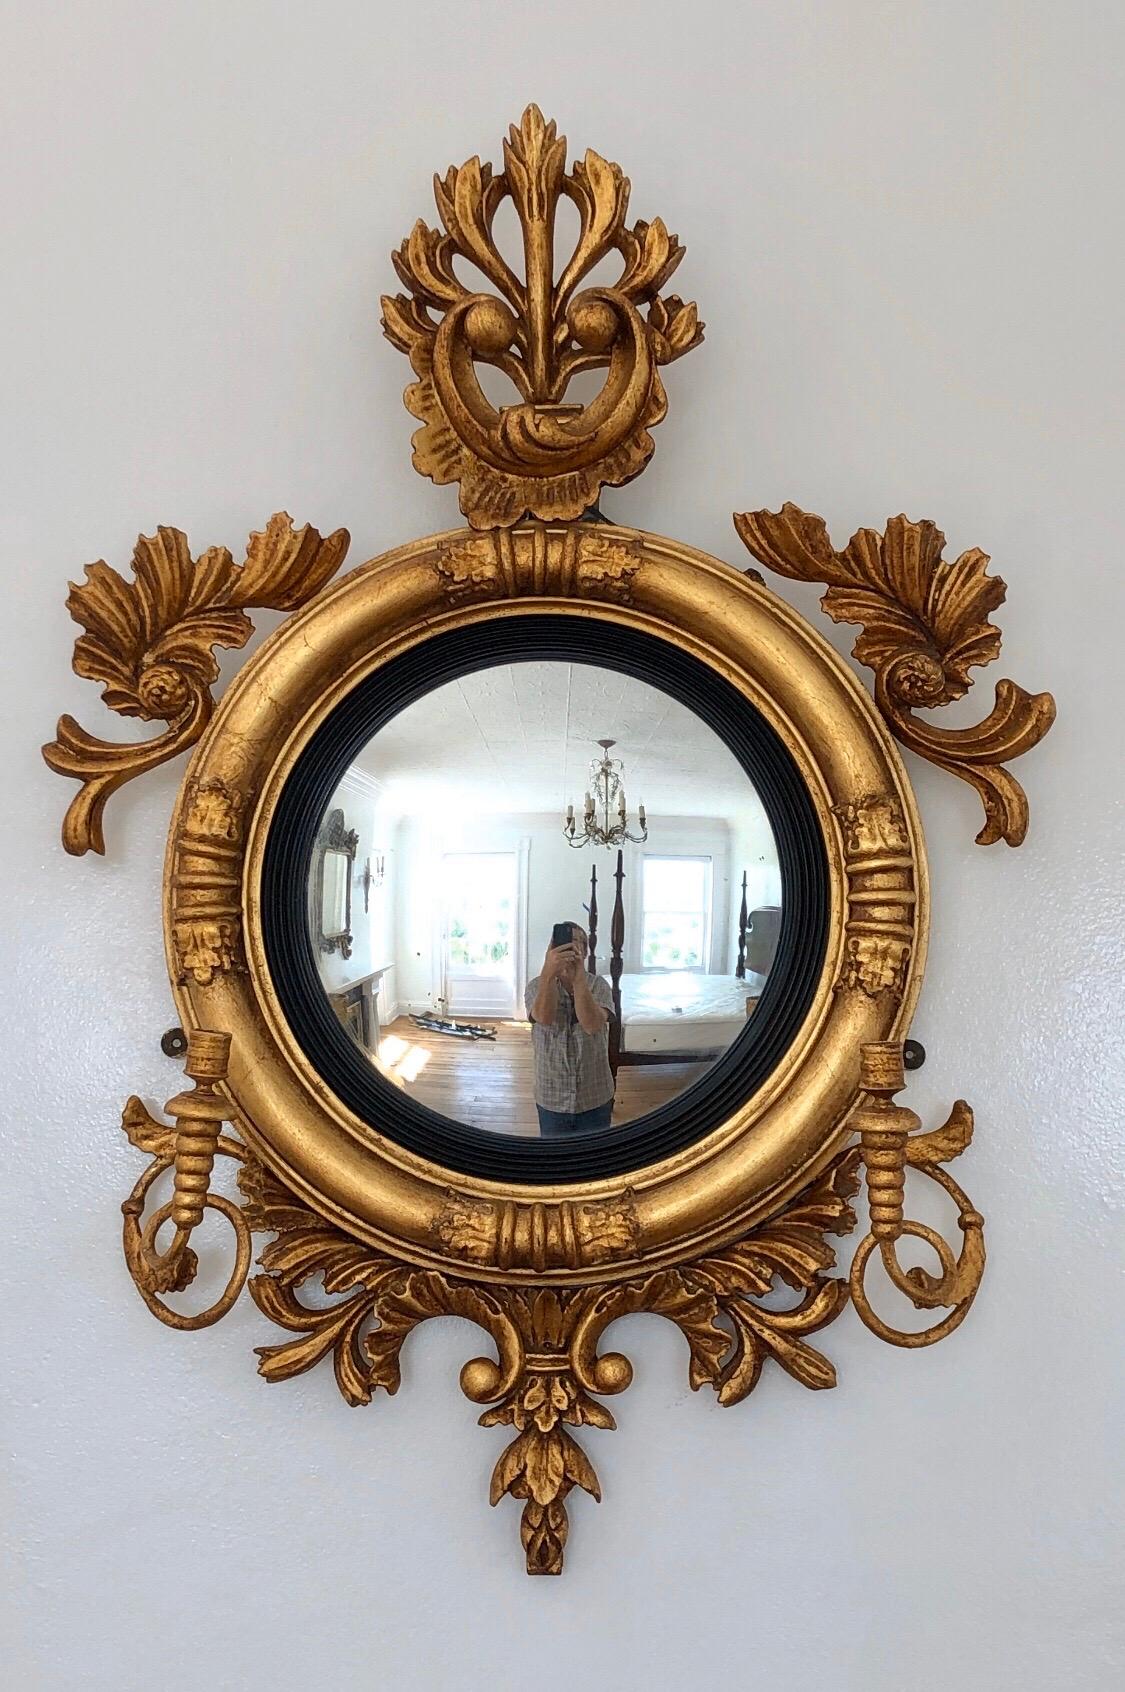 This Regal early 19th century British Convex mirror is craved gilt carved wood with Girandole candle arms.